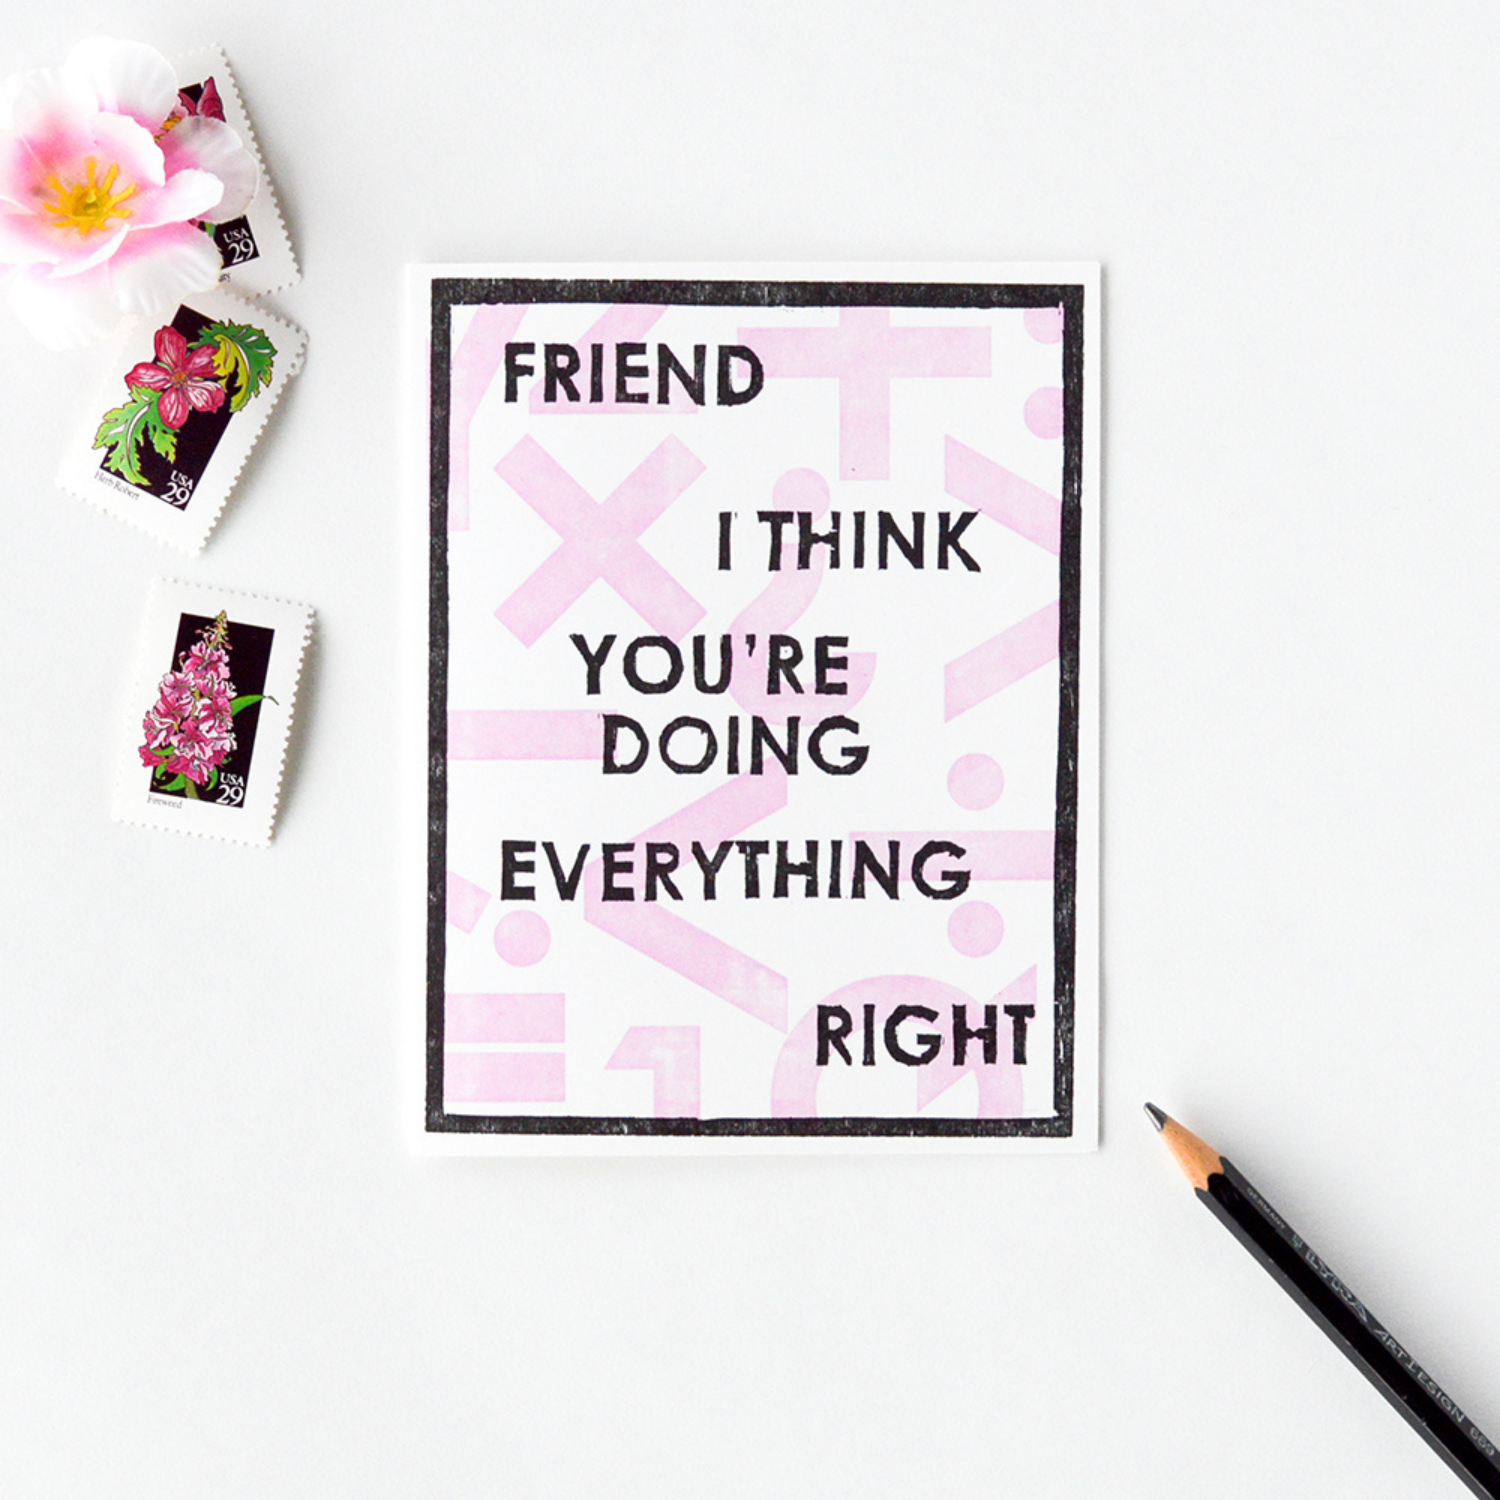 Friend I think you're doing everything right letterpress card